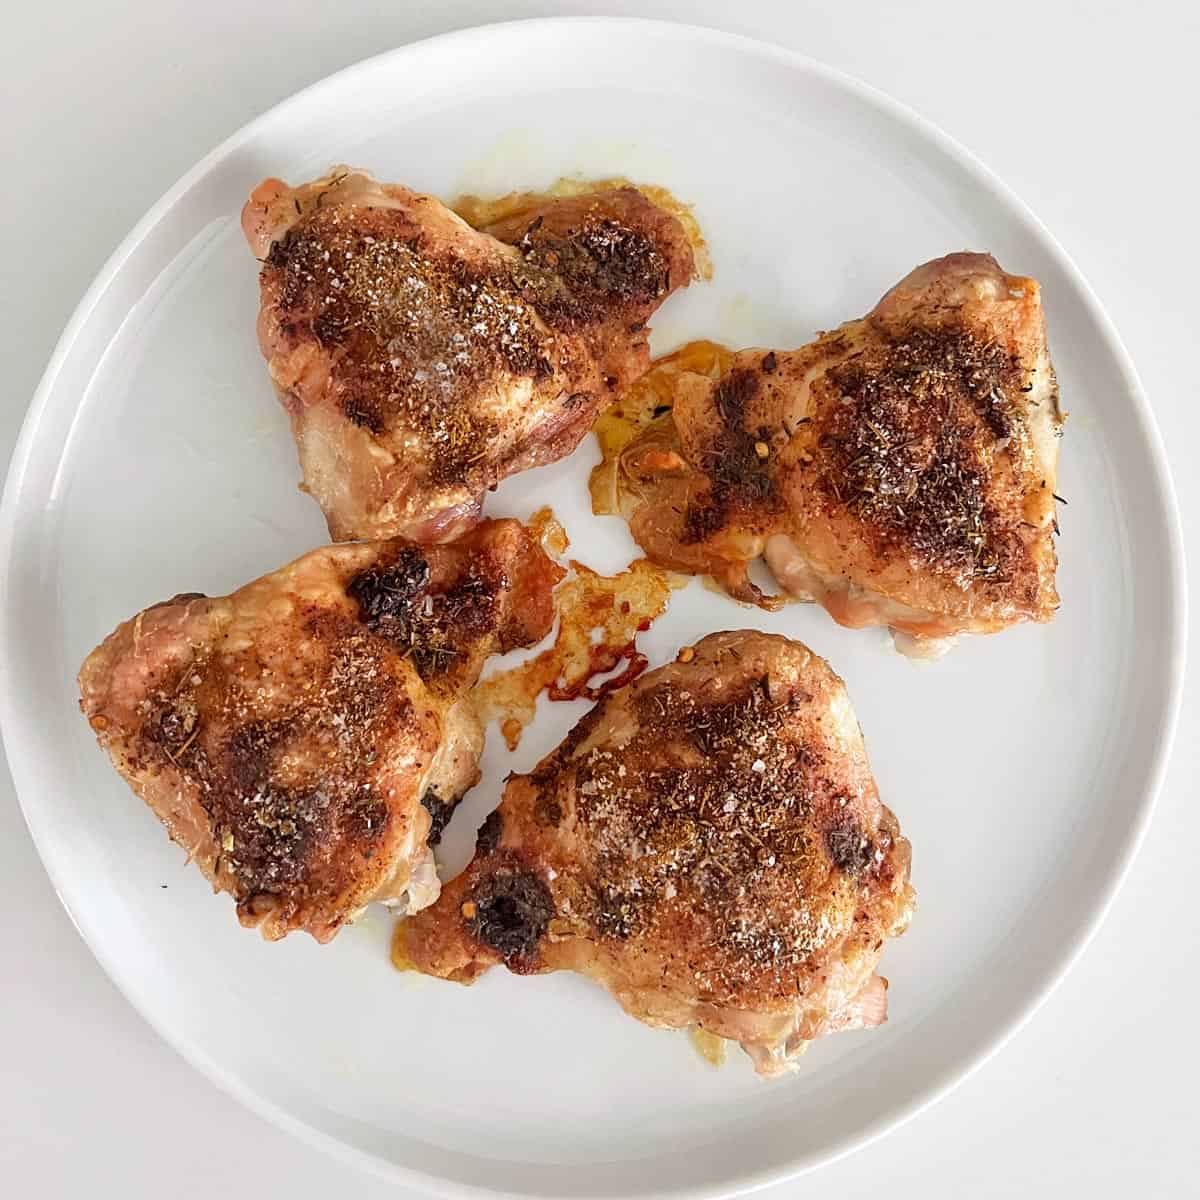 Jerk chicken thighs are served on a white plate.